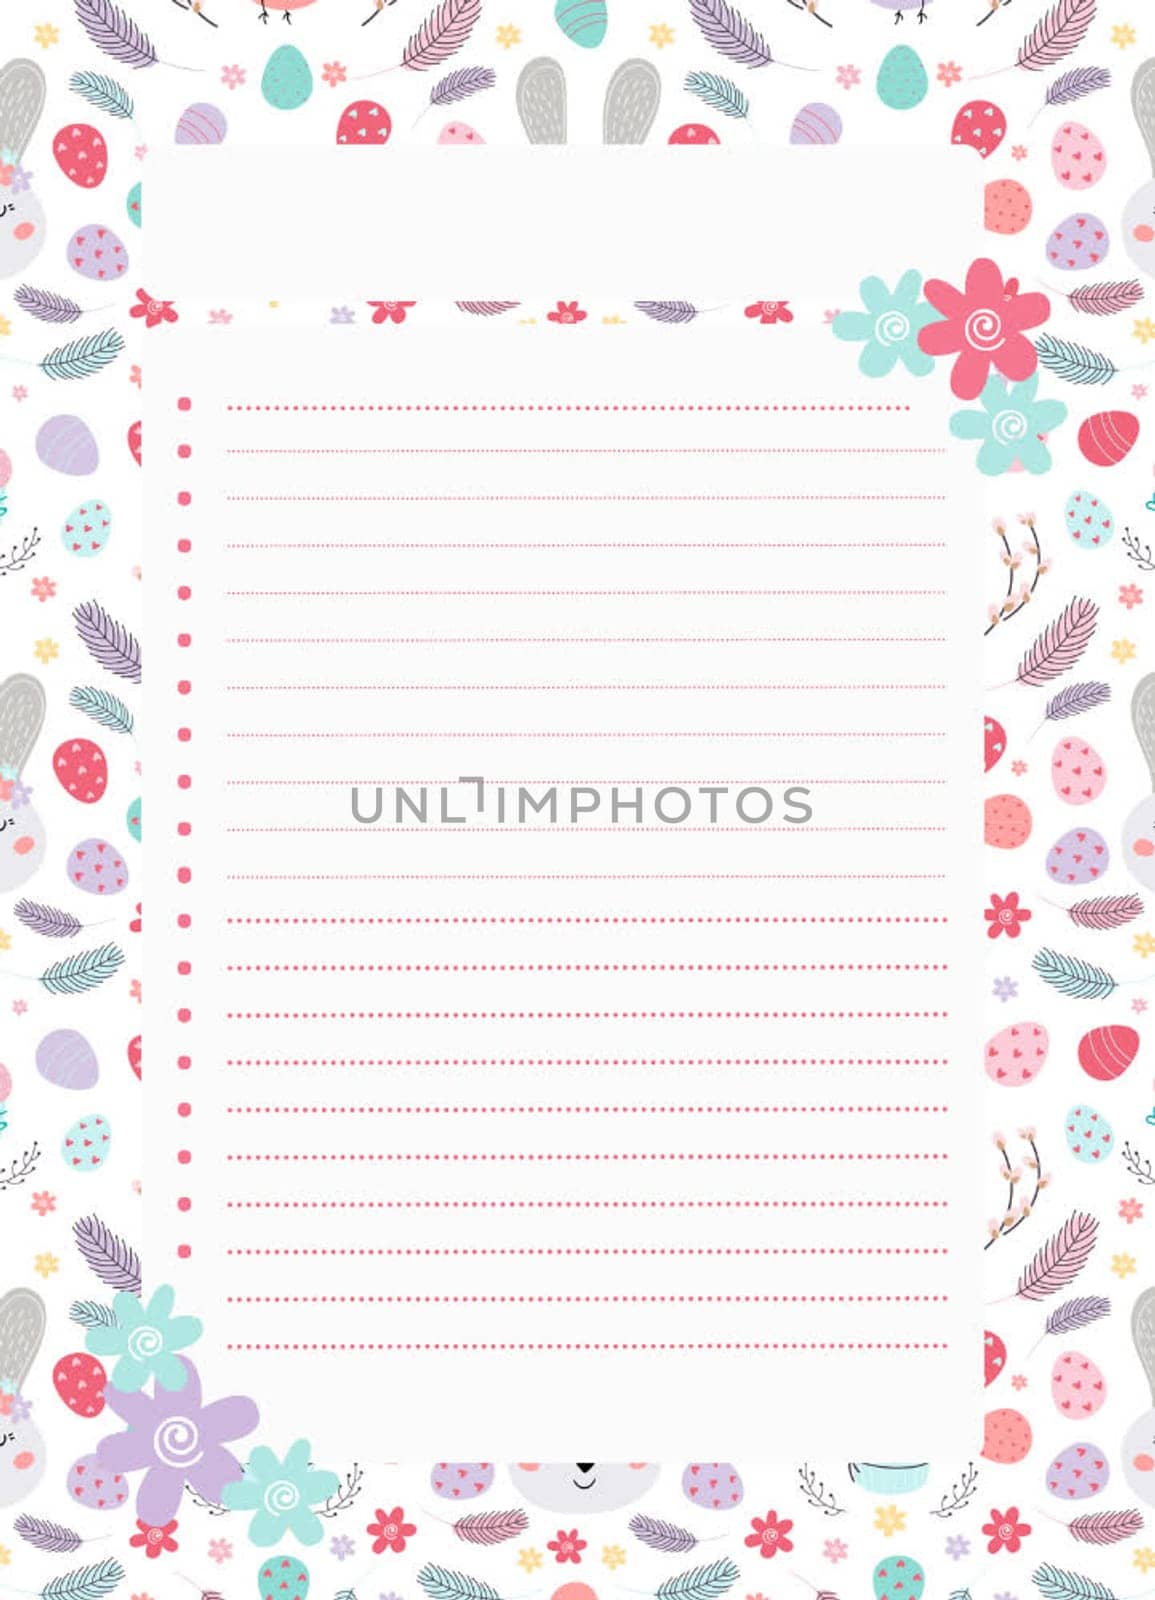 A colorful flowery background with a white frame by Dustick